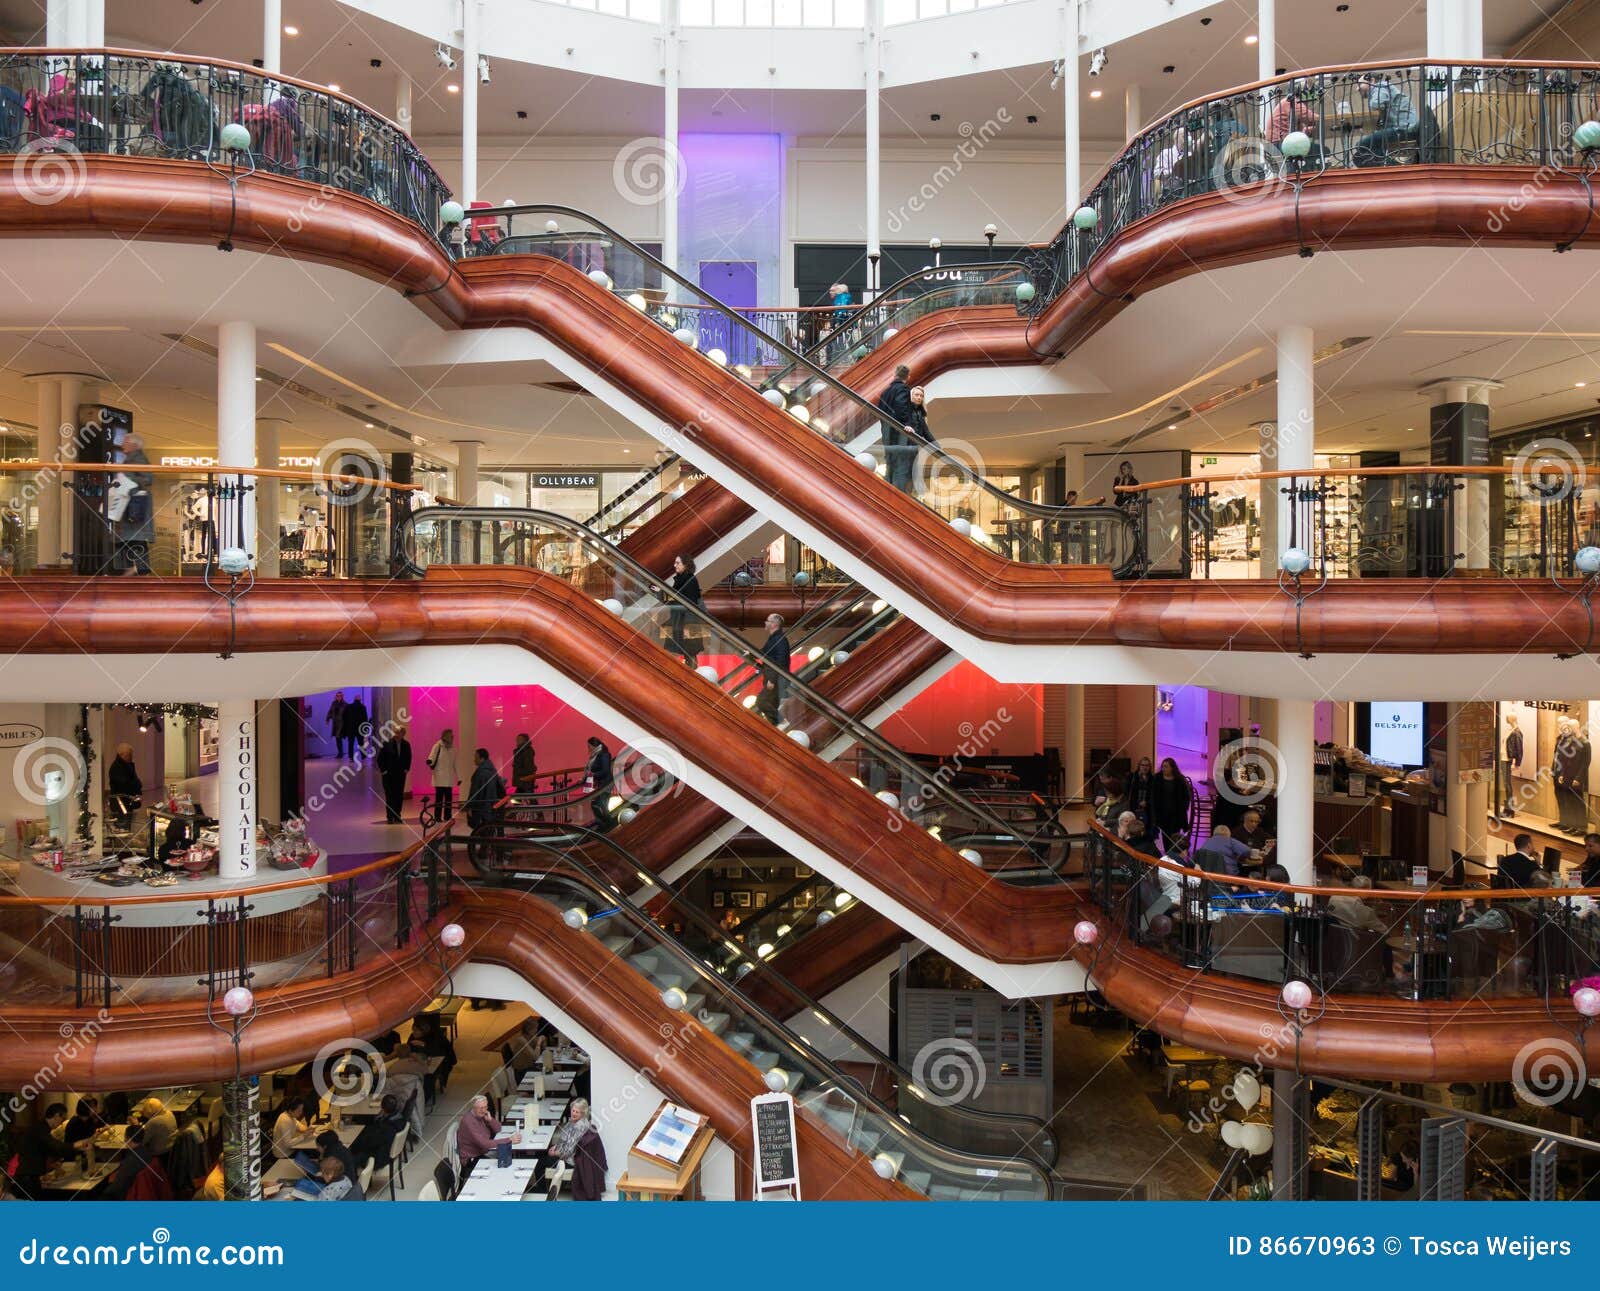 Princes Square Shopping Mall In Glasgow Editorial Stock Photo